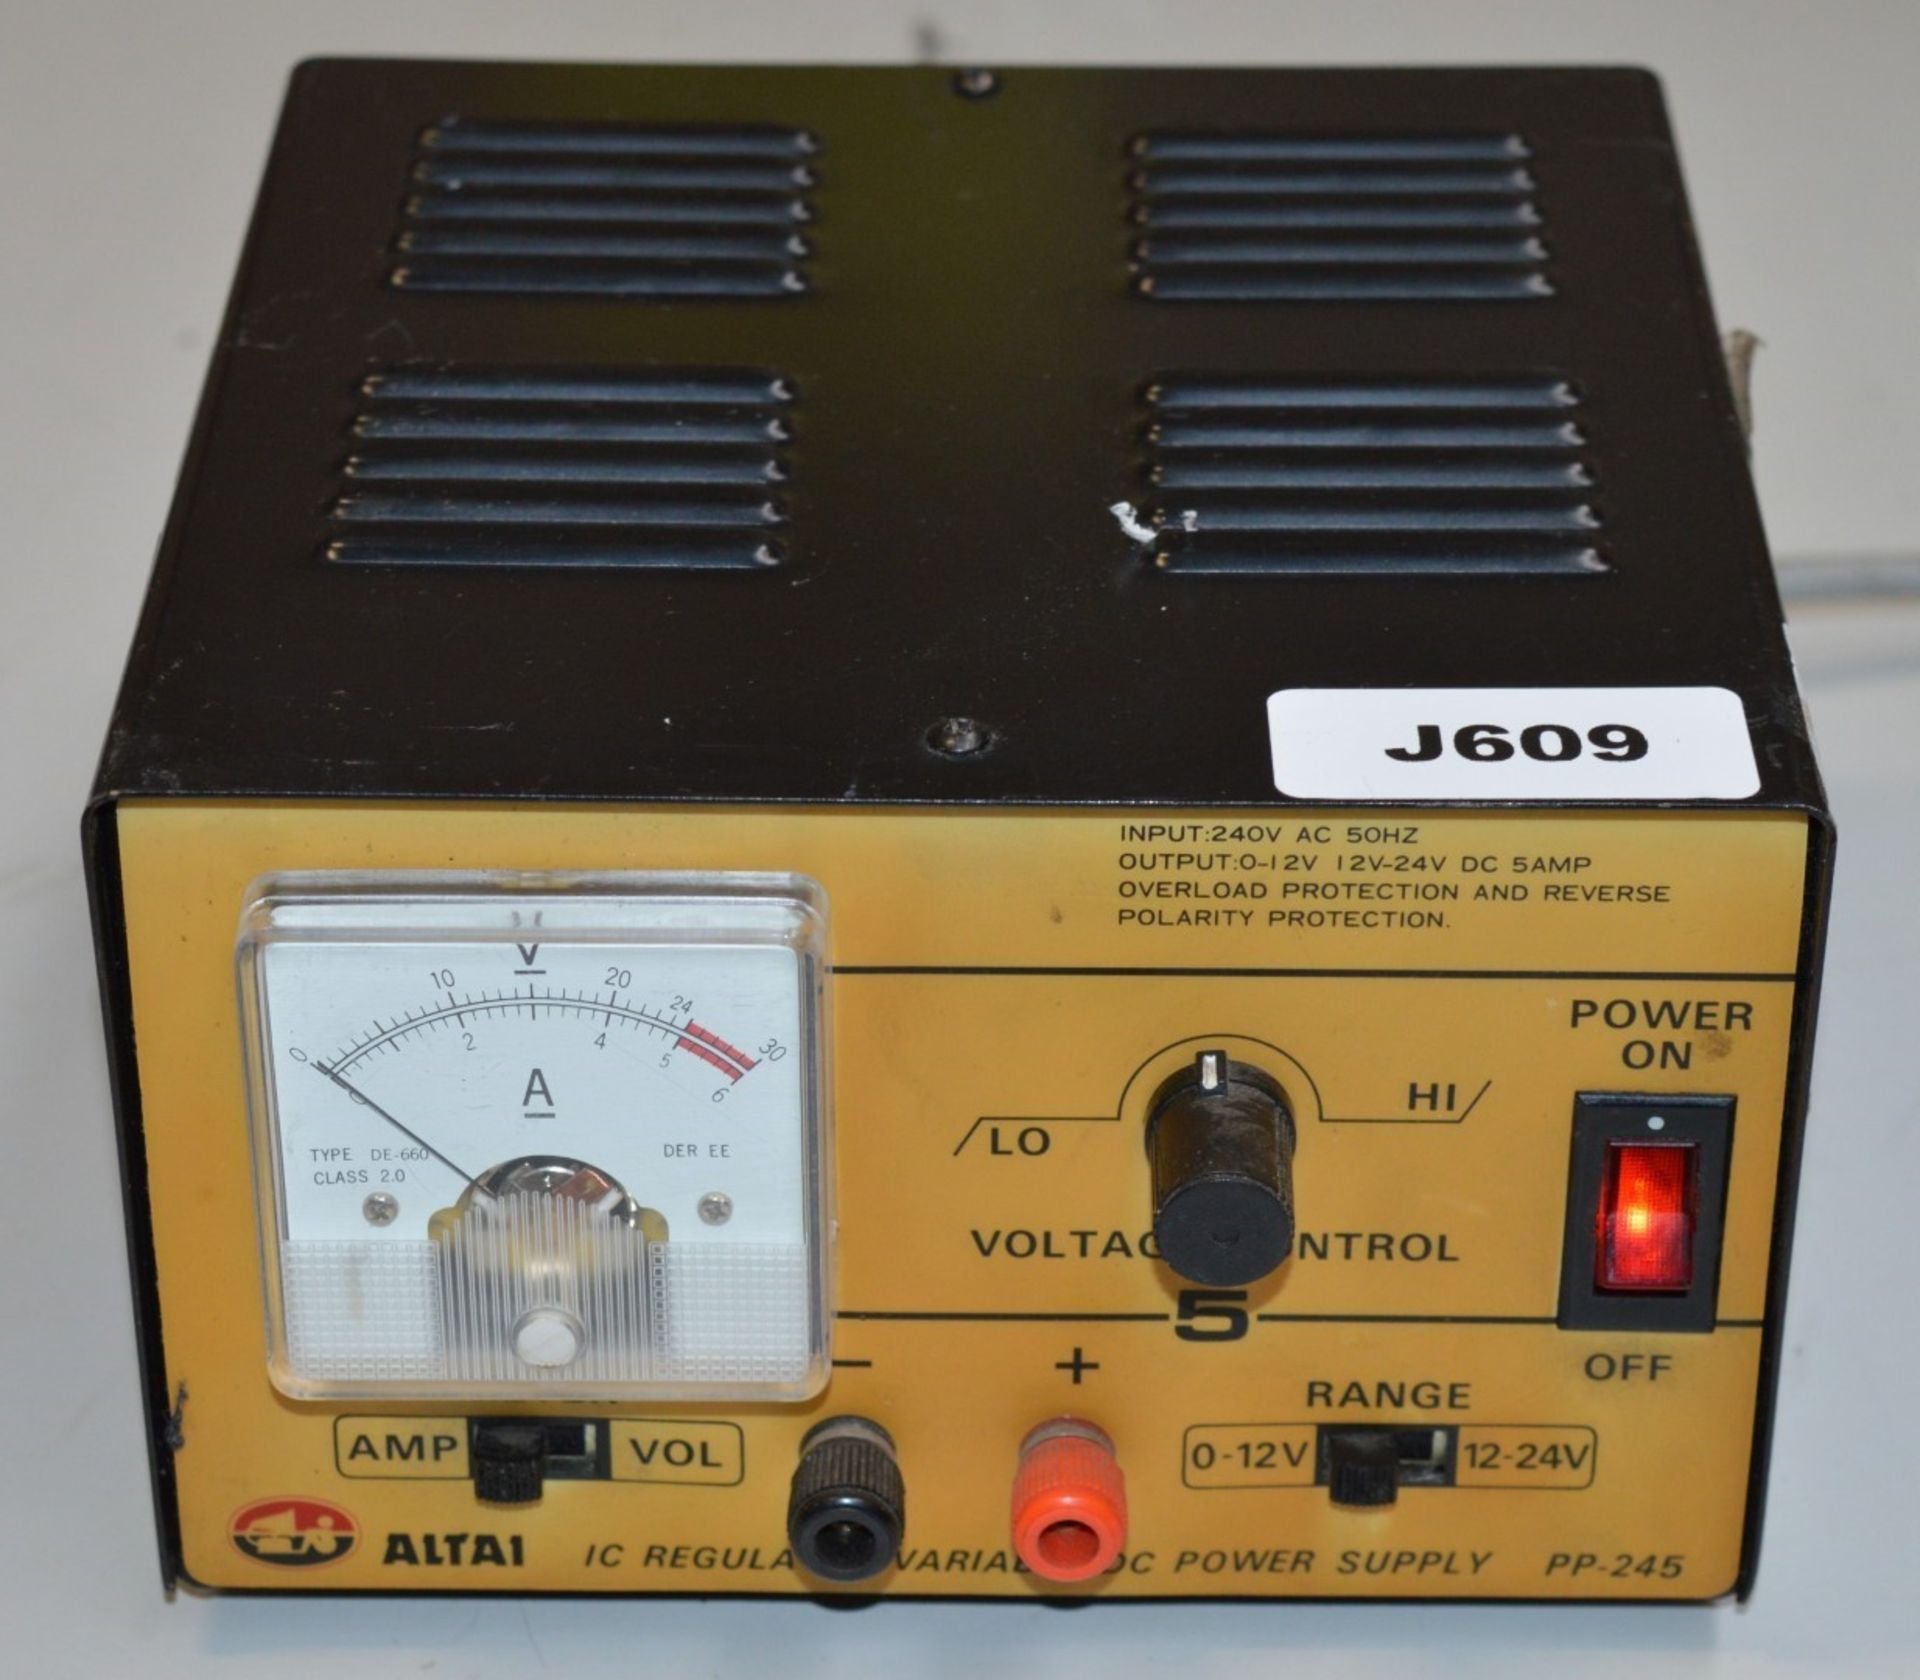 1 x Altai IC Regulated Variable Power Supply - Model PP-245 - Vintage Test Equipment - CL011 - Ref